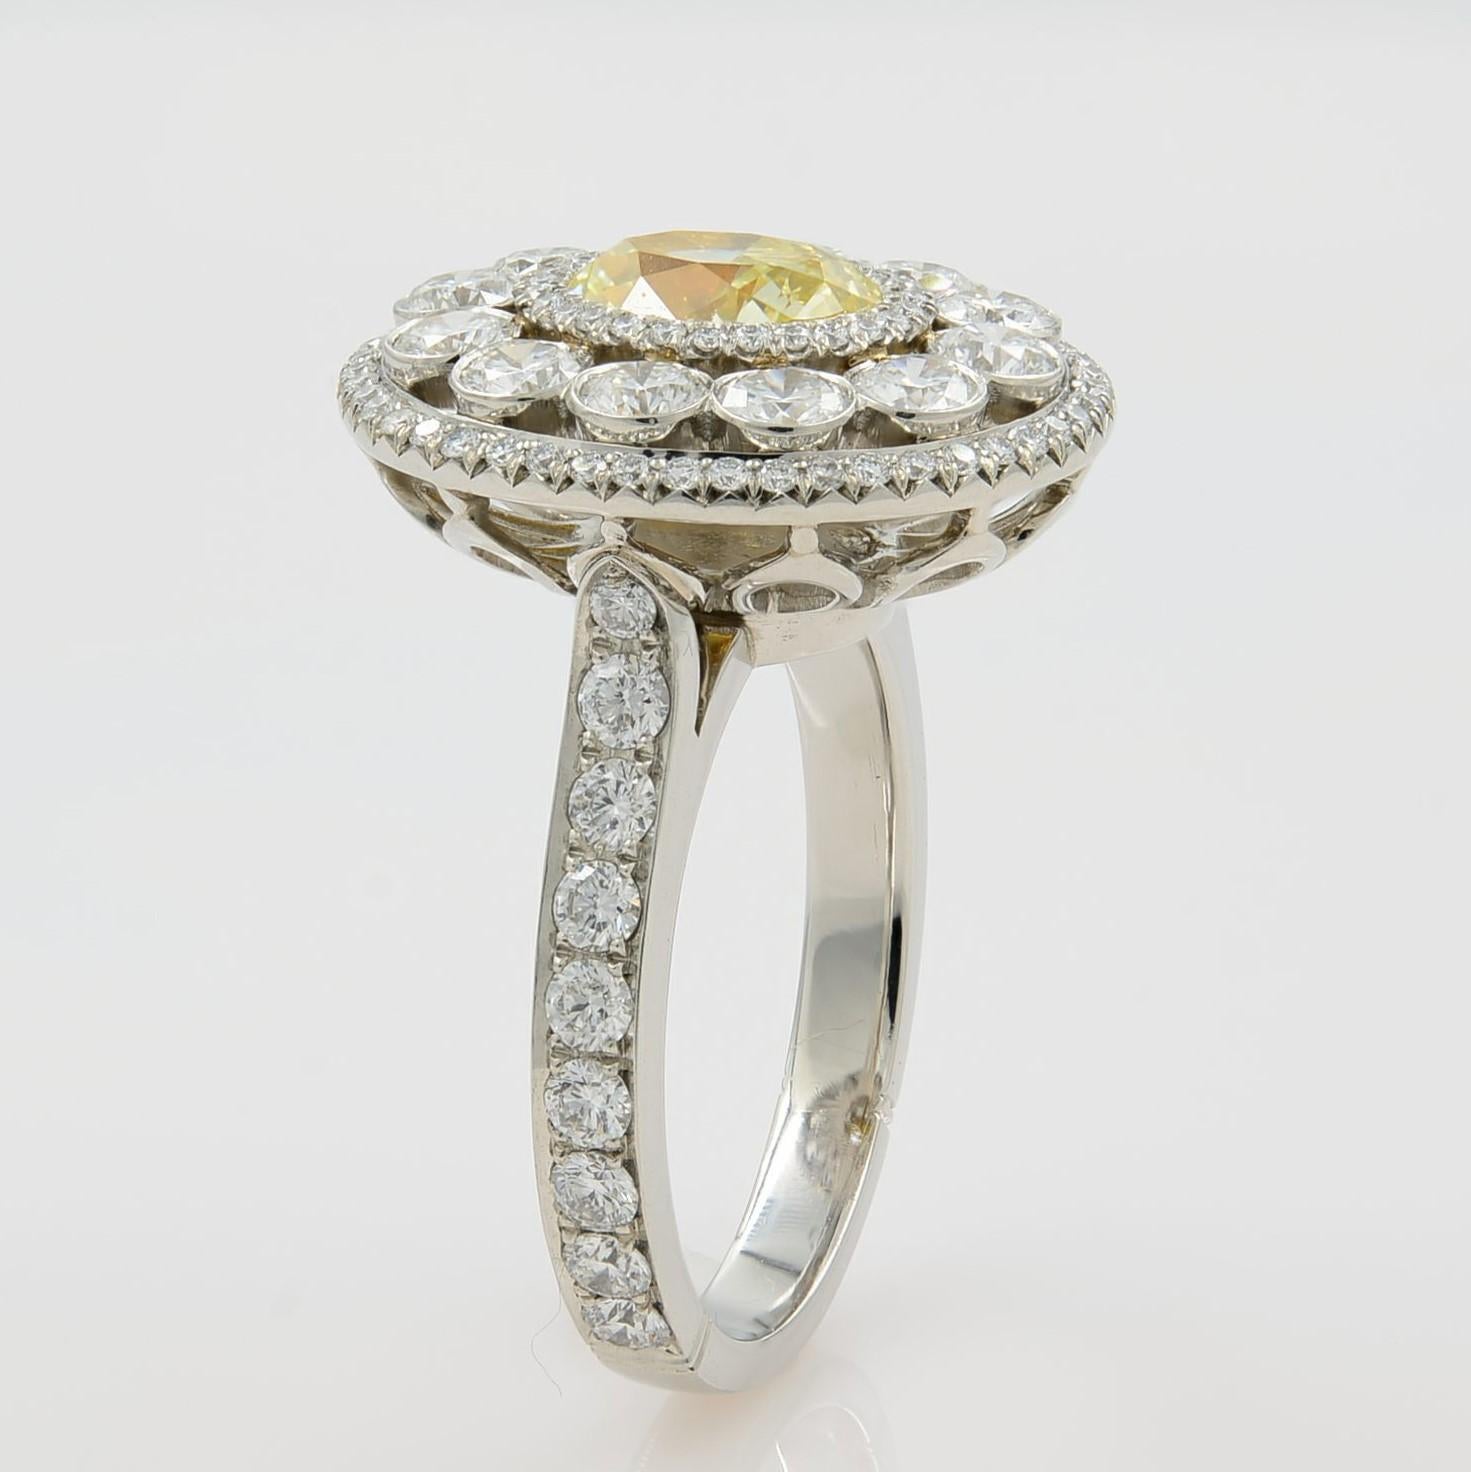 This beautiful piece features a one-carat light fancy yellow diamond surrounded by three rows of round brilliant diamonds alternating between pave set and bezel set in each row. Set in a bright-cut pave shank composition accented with more sparkling